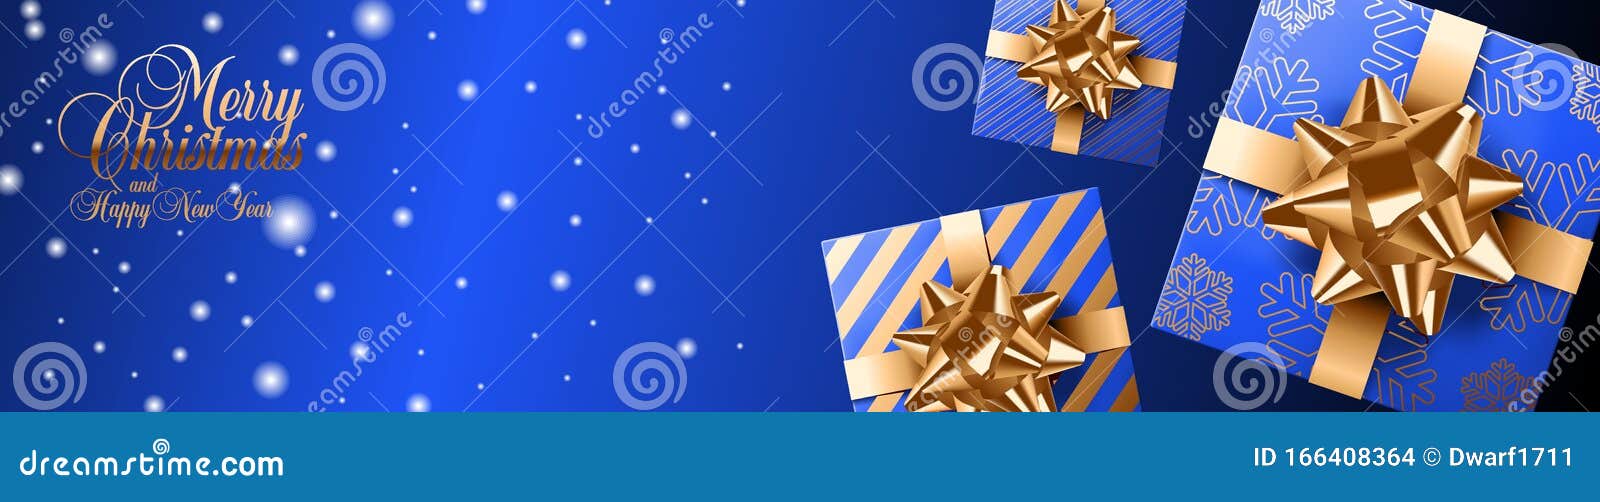 Merry Christmas and Happy New Year golden lettering on royal blue background. Realistic website header or banner layout with snow and gifts with golden bows.